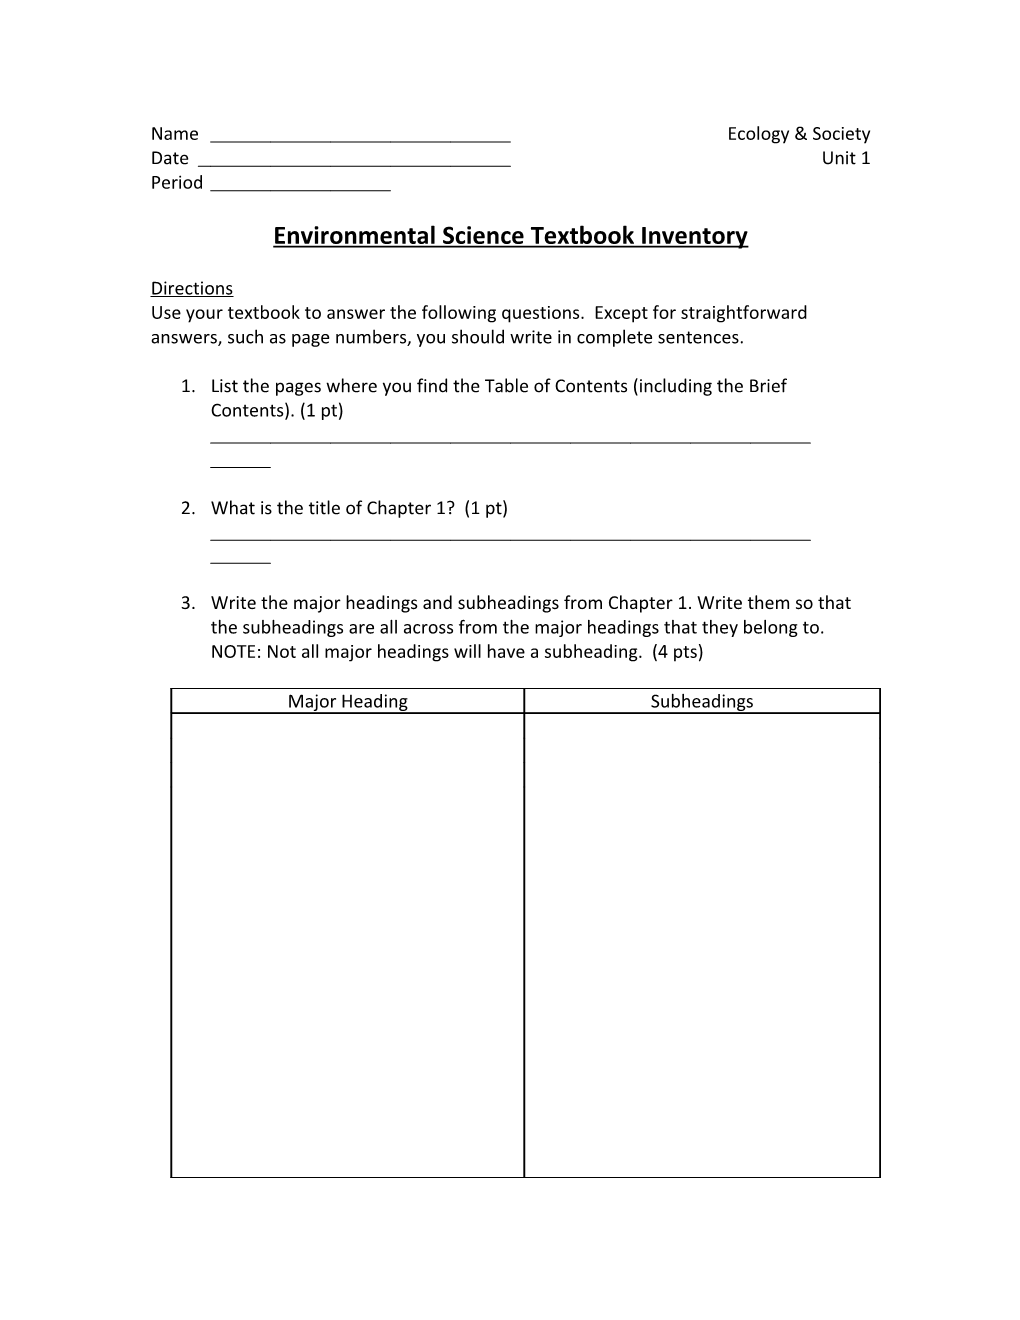 Environmental Science Textbook Inventory